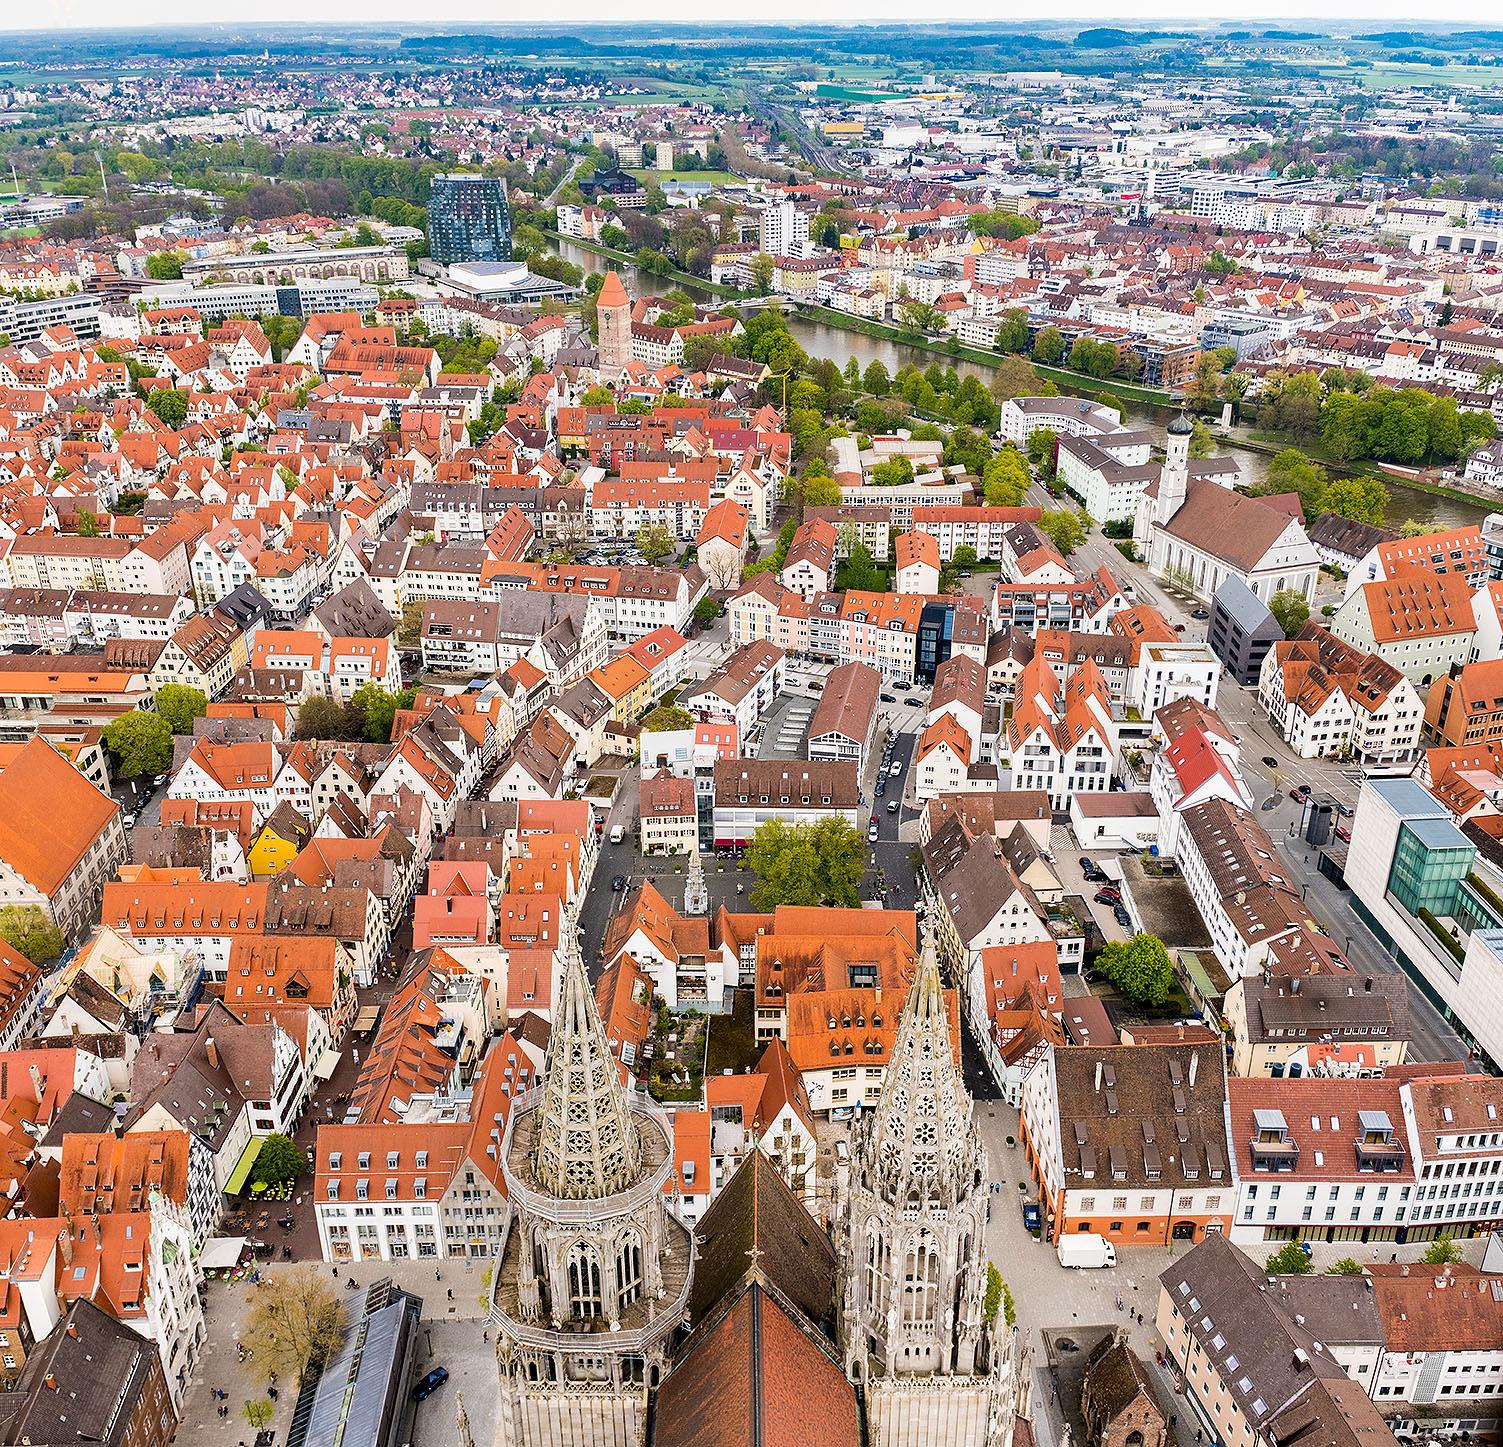 Ulm, a city in the south German state of Baden-Wuerttemberg ...